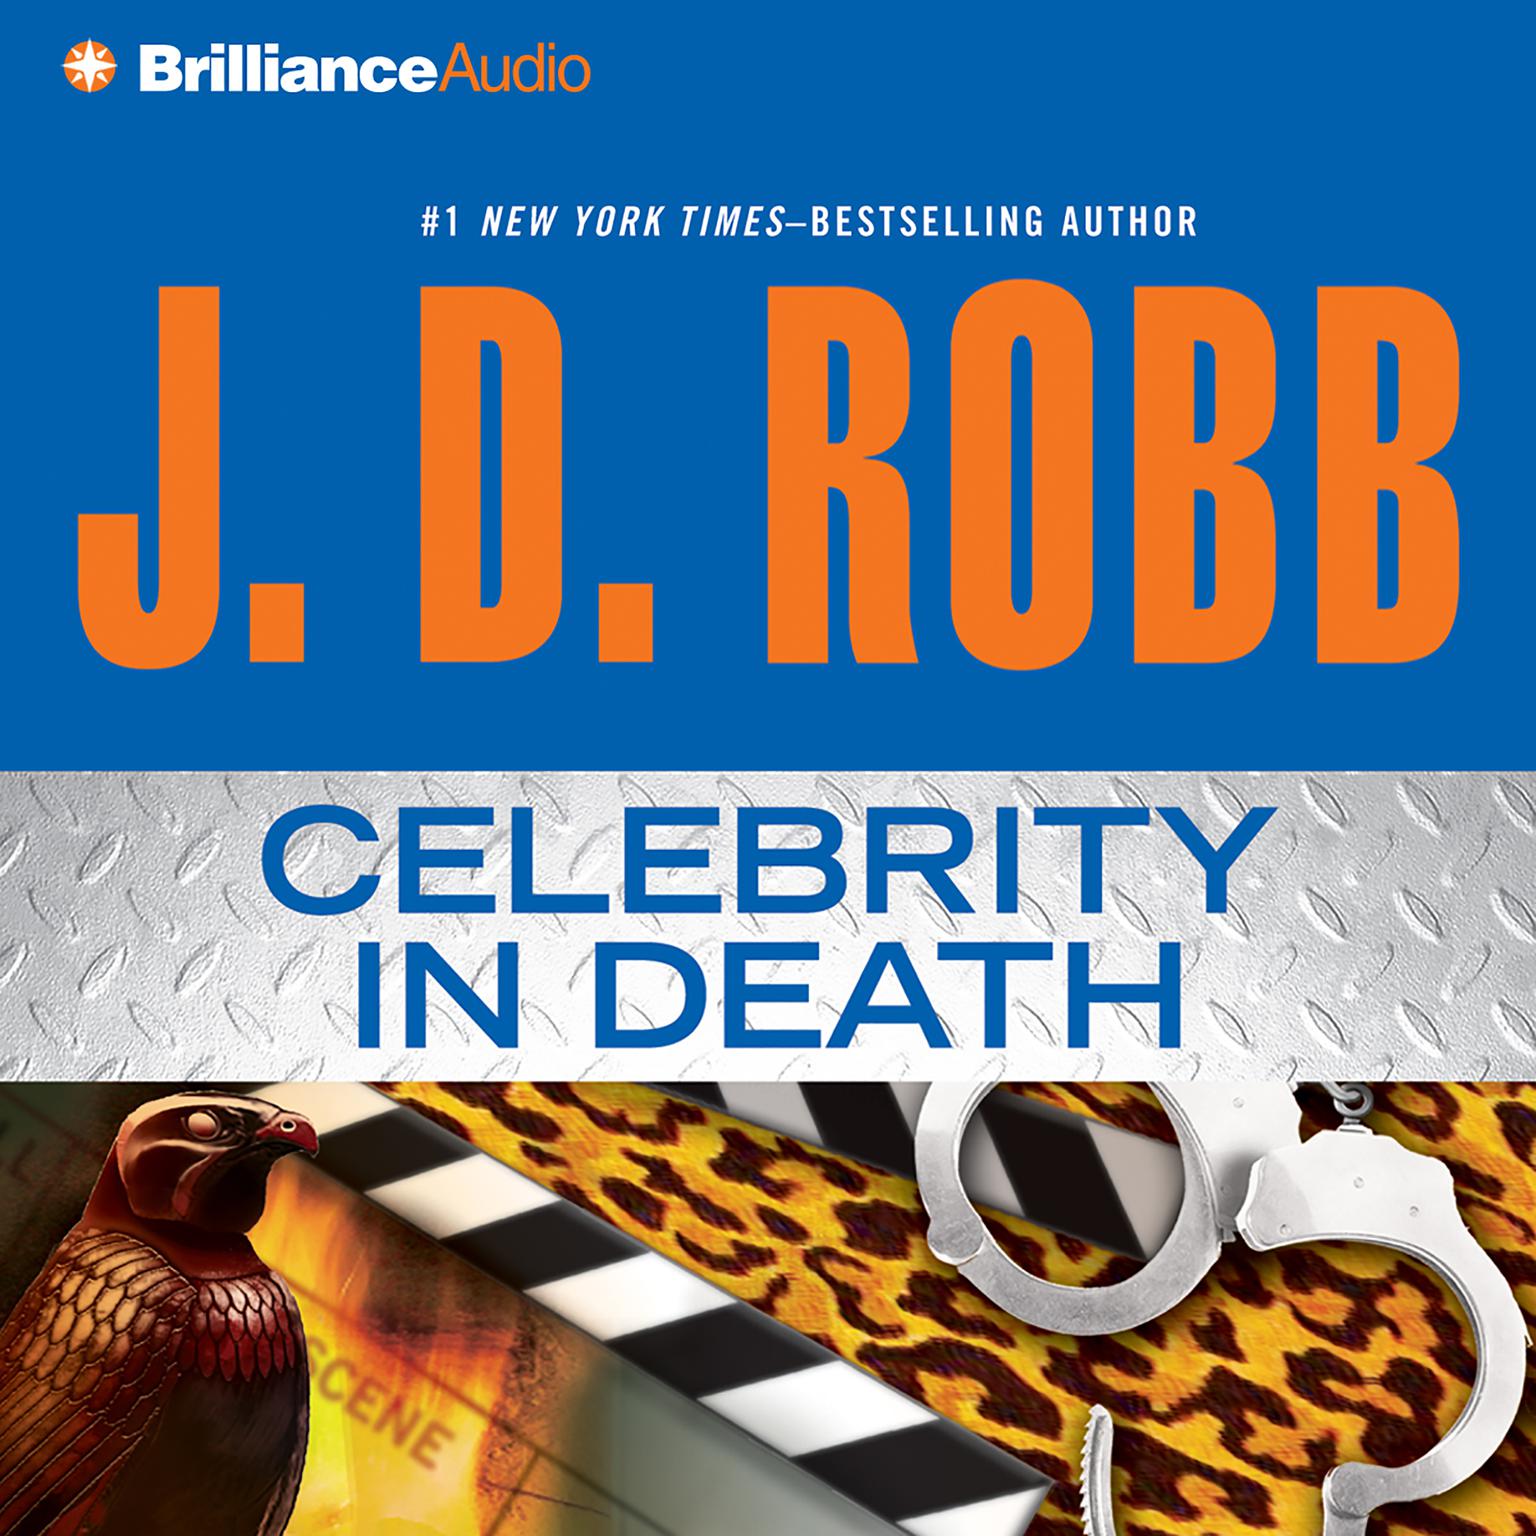 Celebrity in Death (Abridged) Audiobook, by J. D. Robb